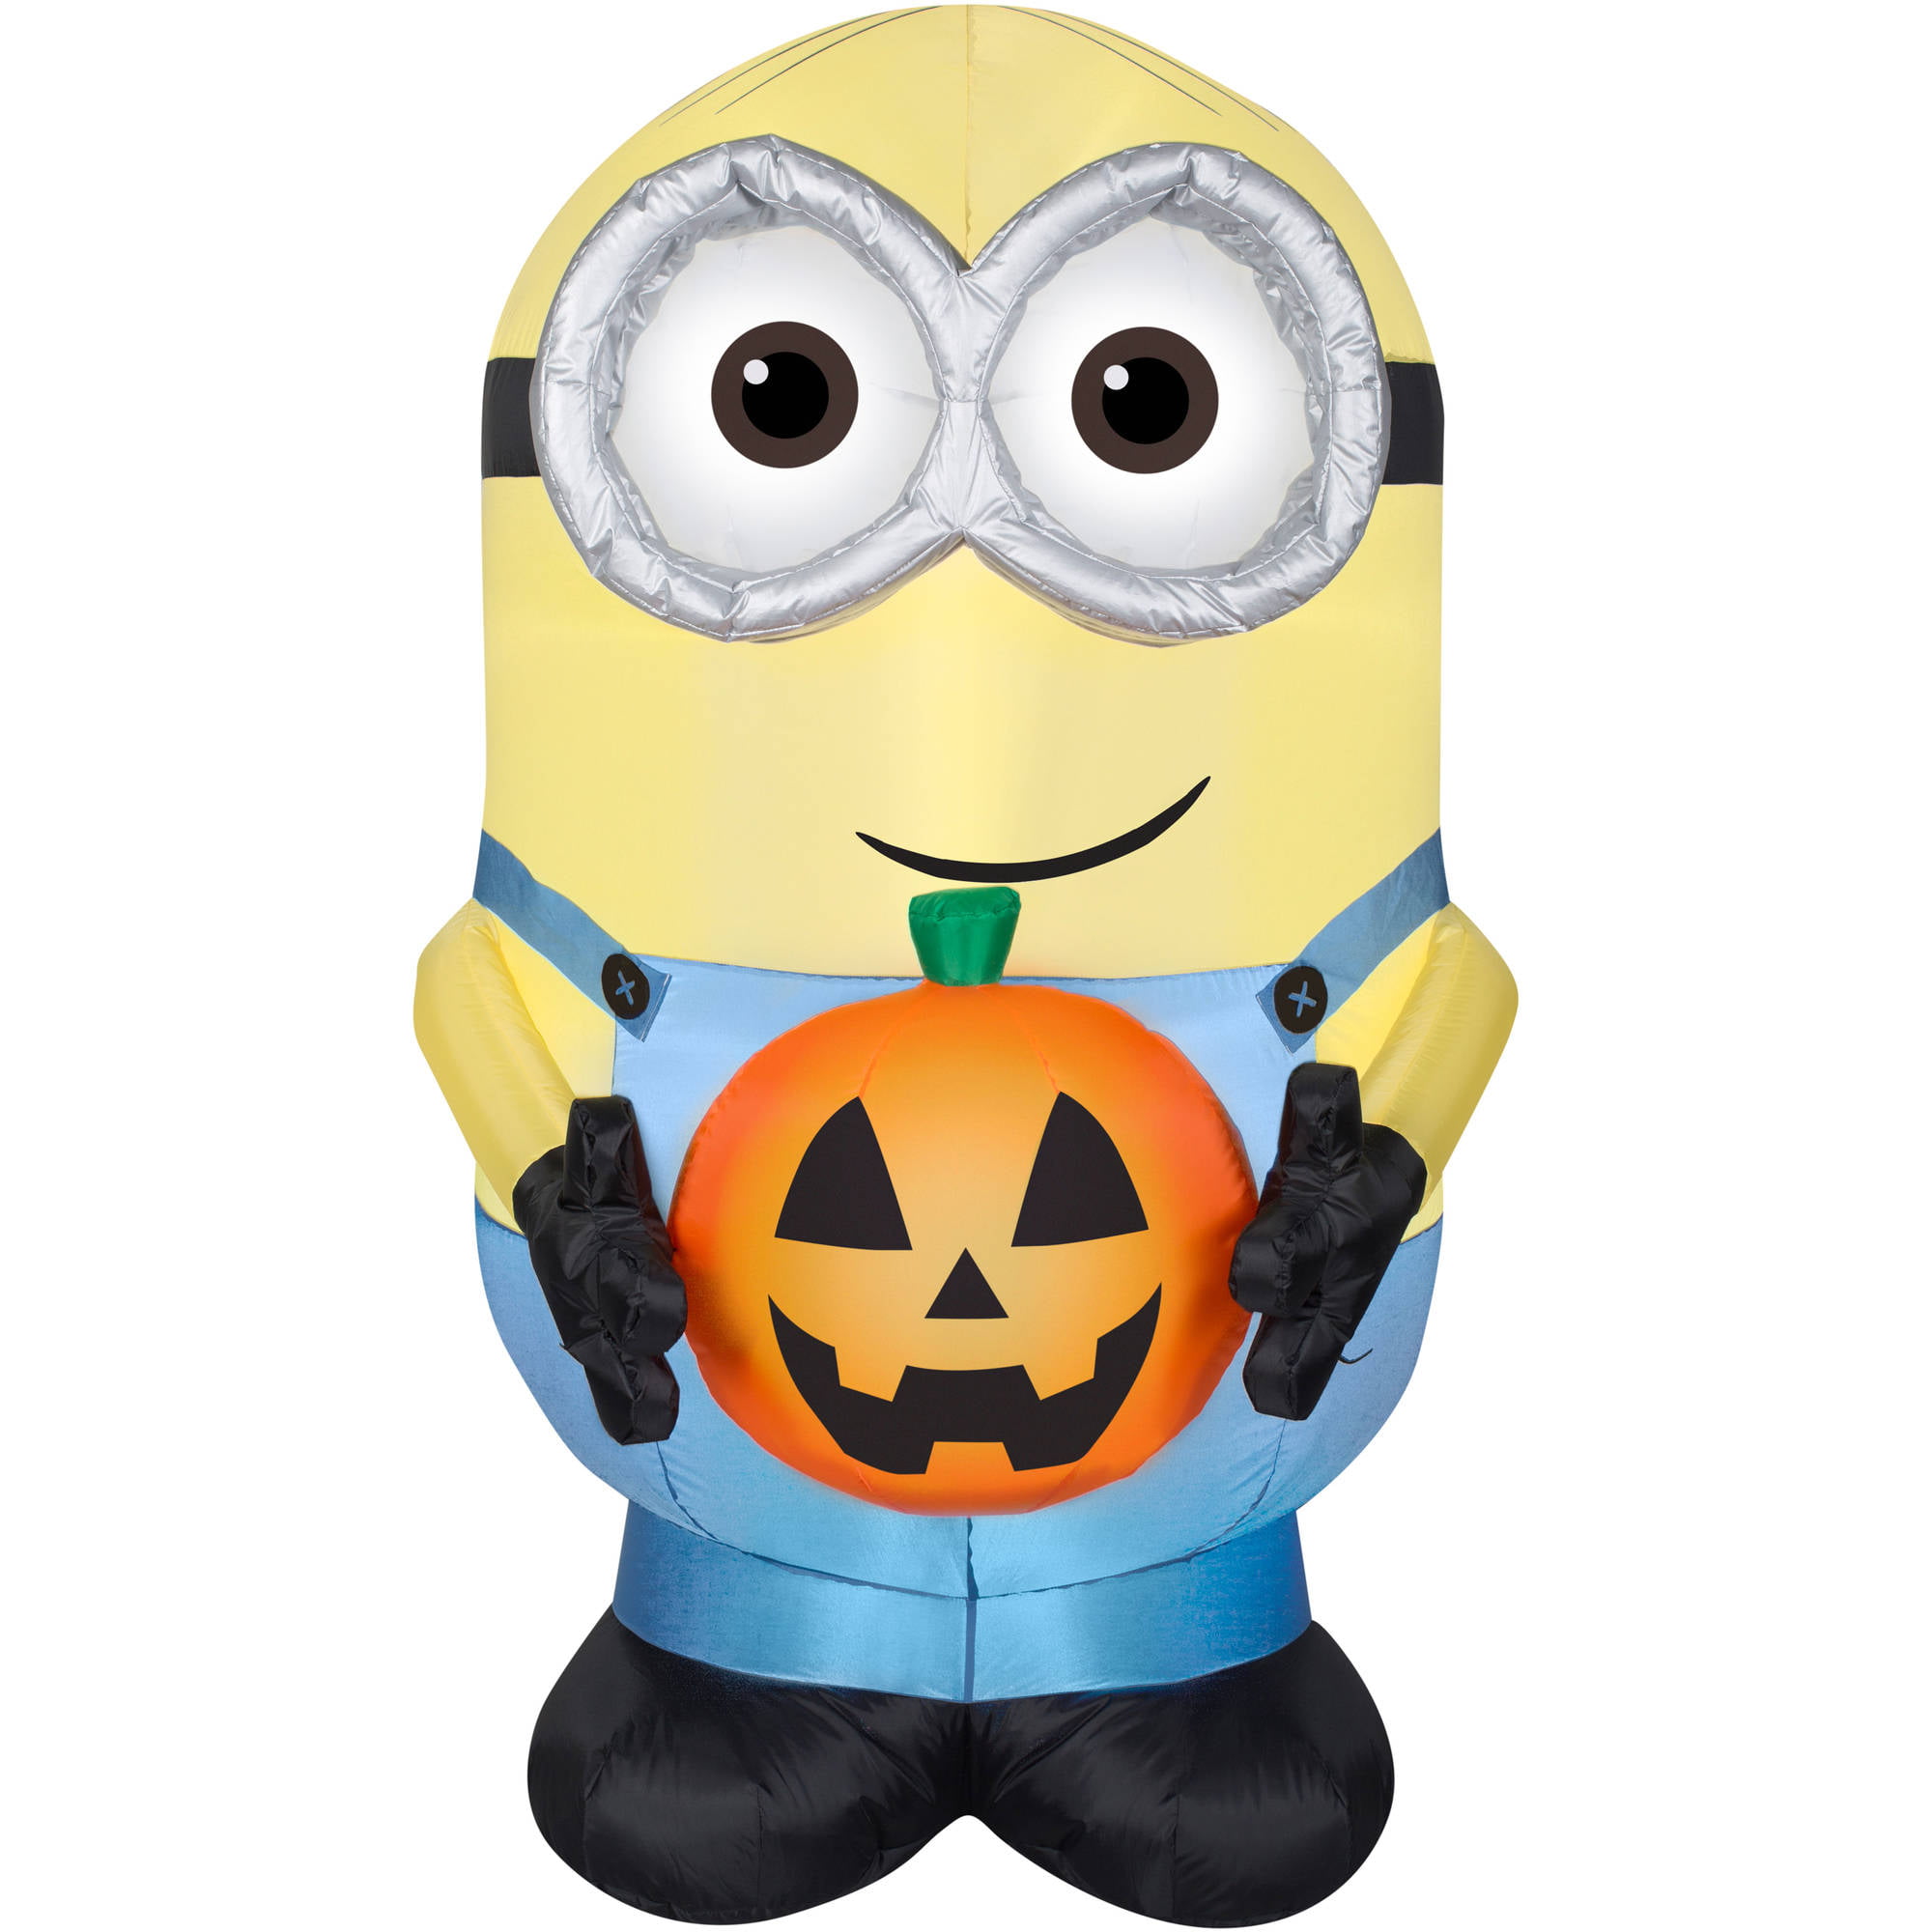 Minion Halloween Inflatables - Best Decorations